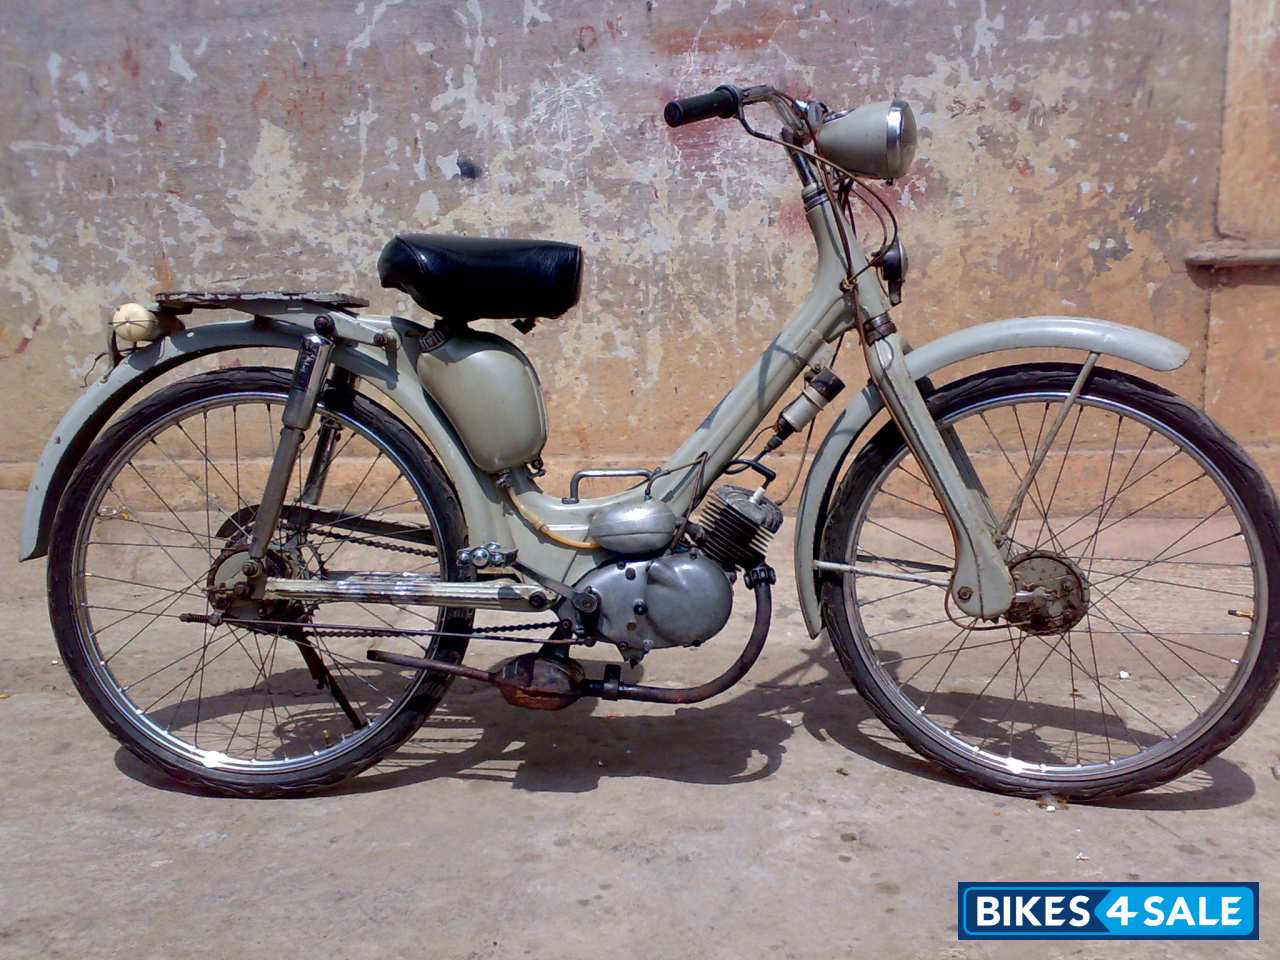 Buy Old Used Bikes For Sale UP TO 60% OFF